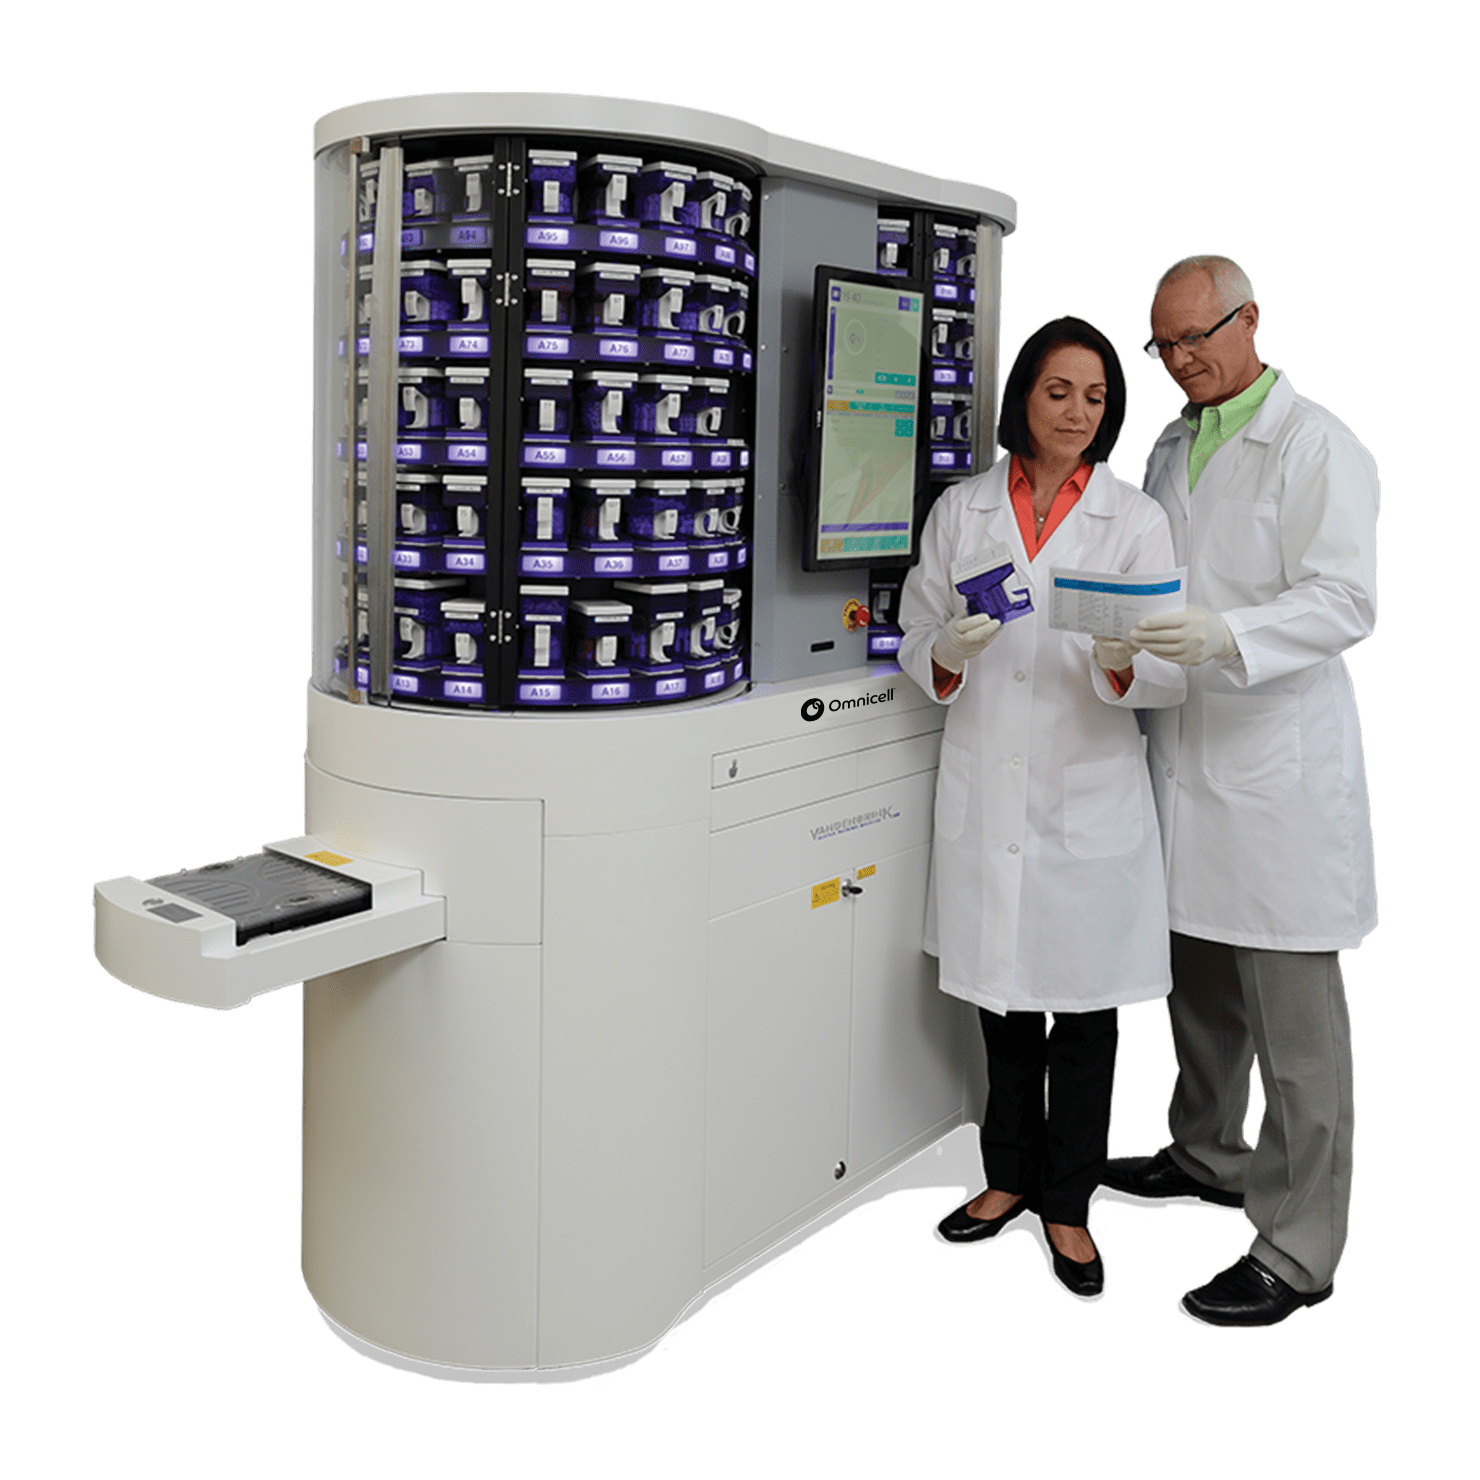 Image of two doctors standing next to the VBM200F machine